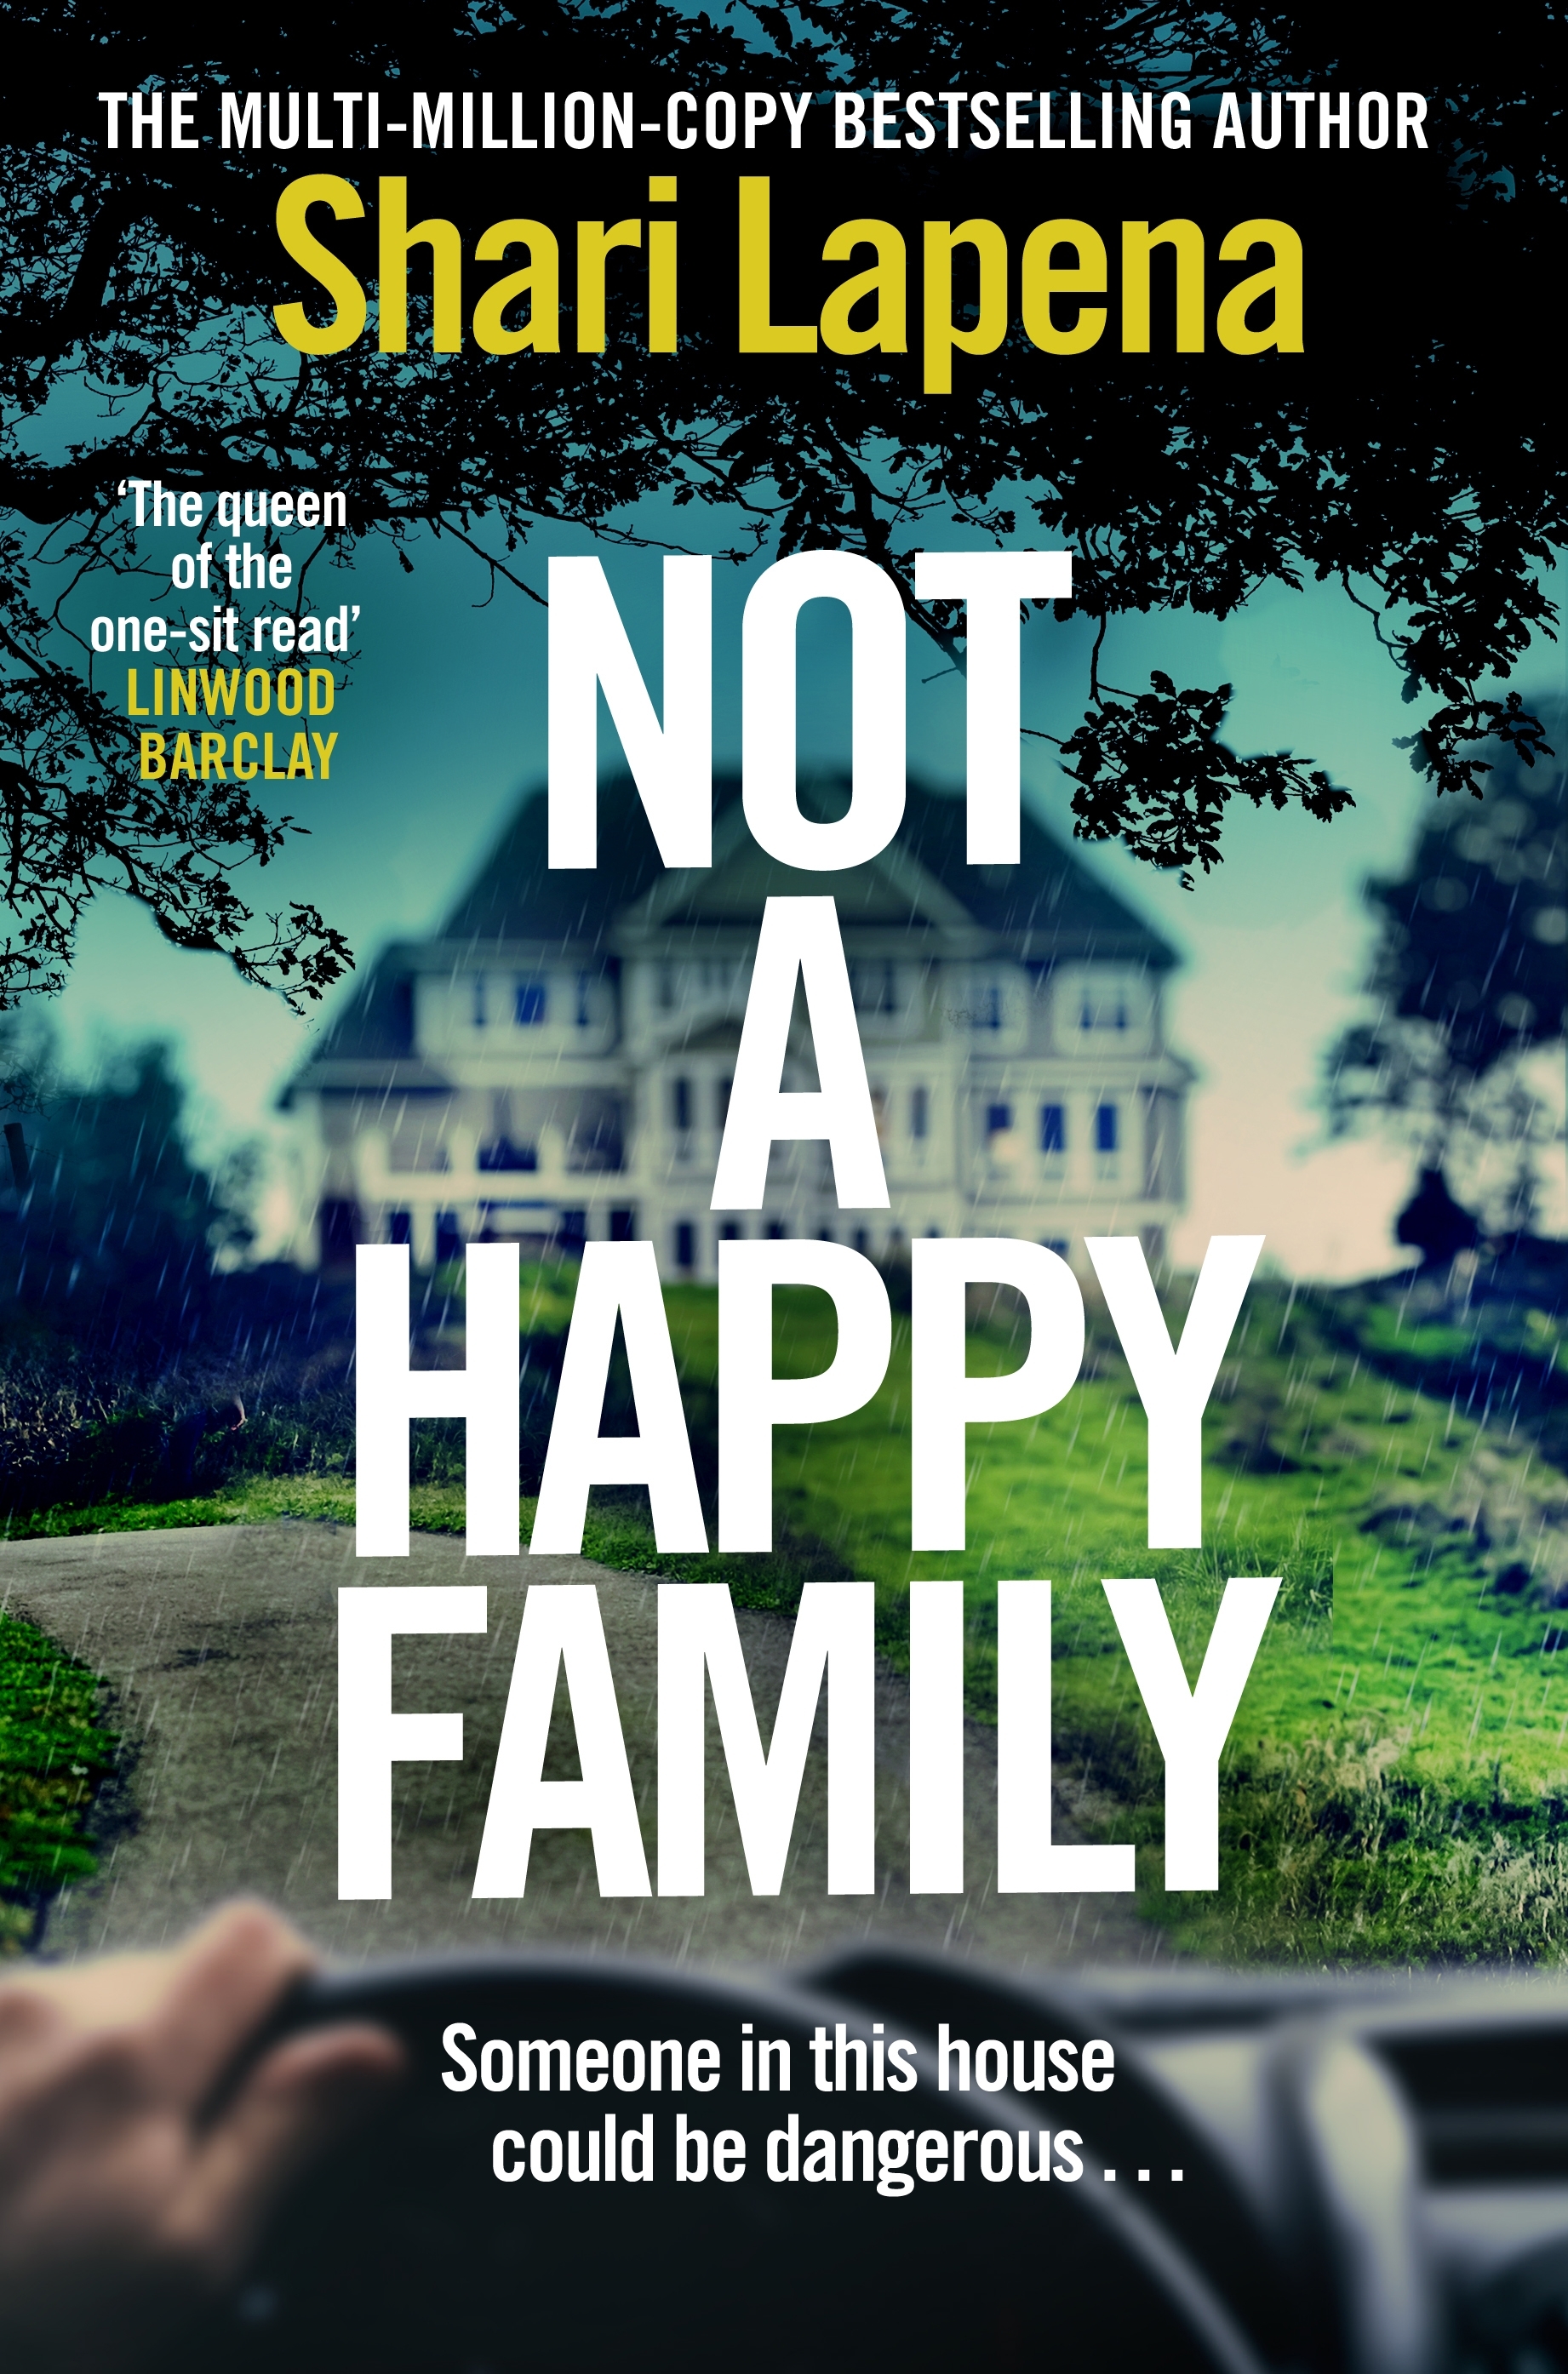 Cover of Not a Happy Family by Shari Lapena